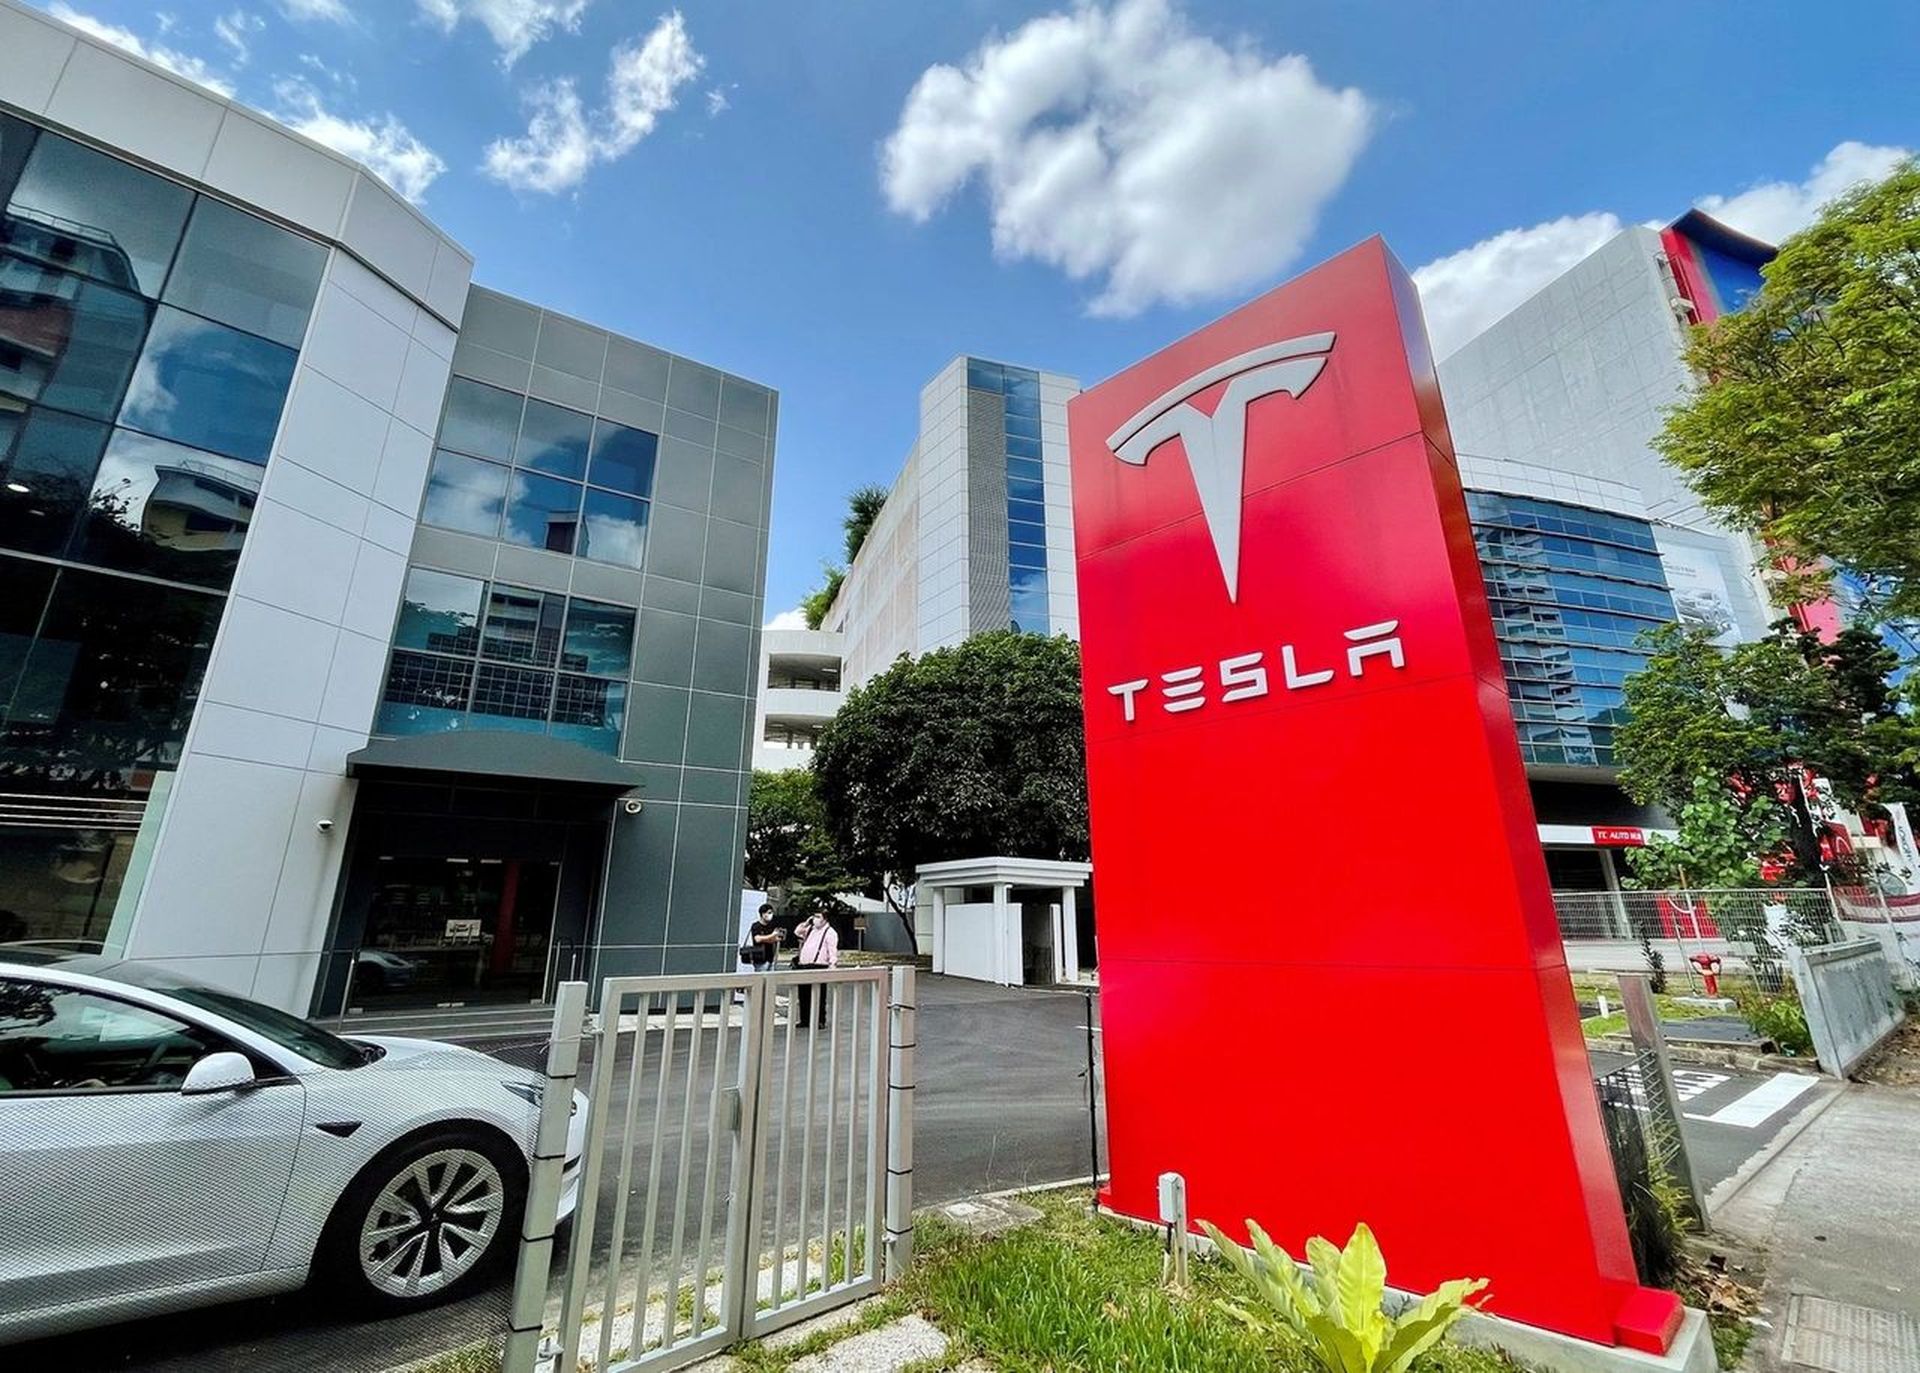 Today, we are covering how to watch Tesla shareholder meeting 2022, so you can learn what decisions will be taken that will impact the future of the company.